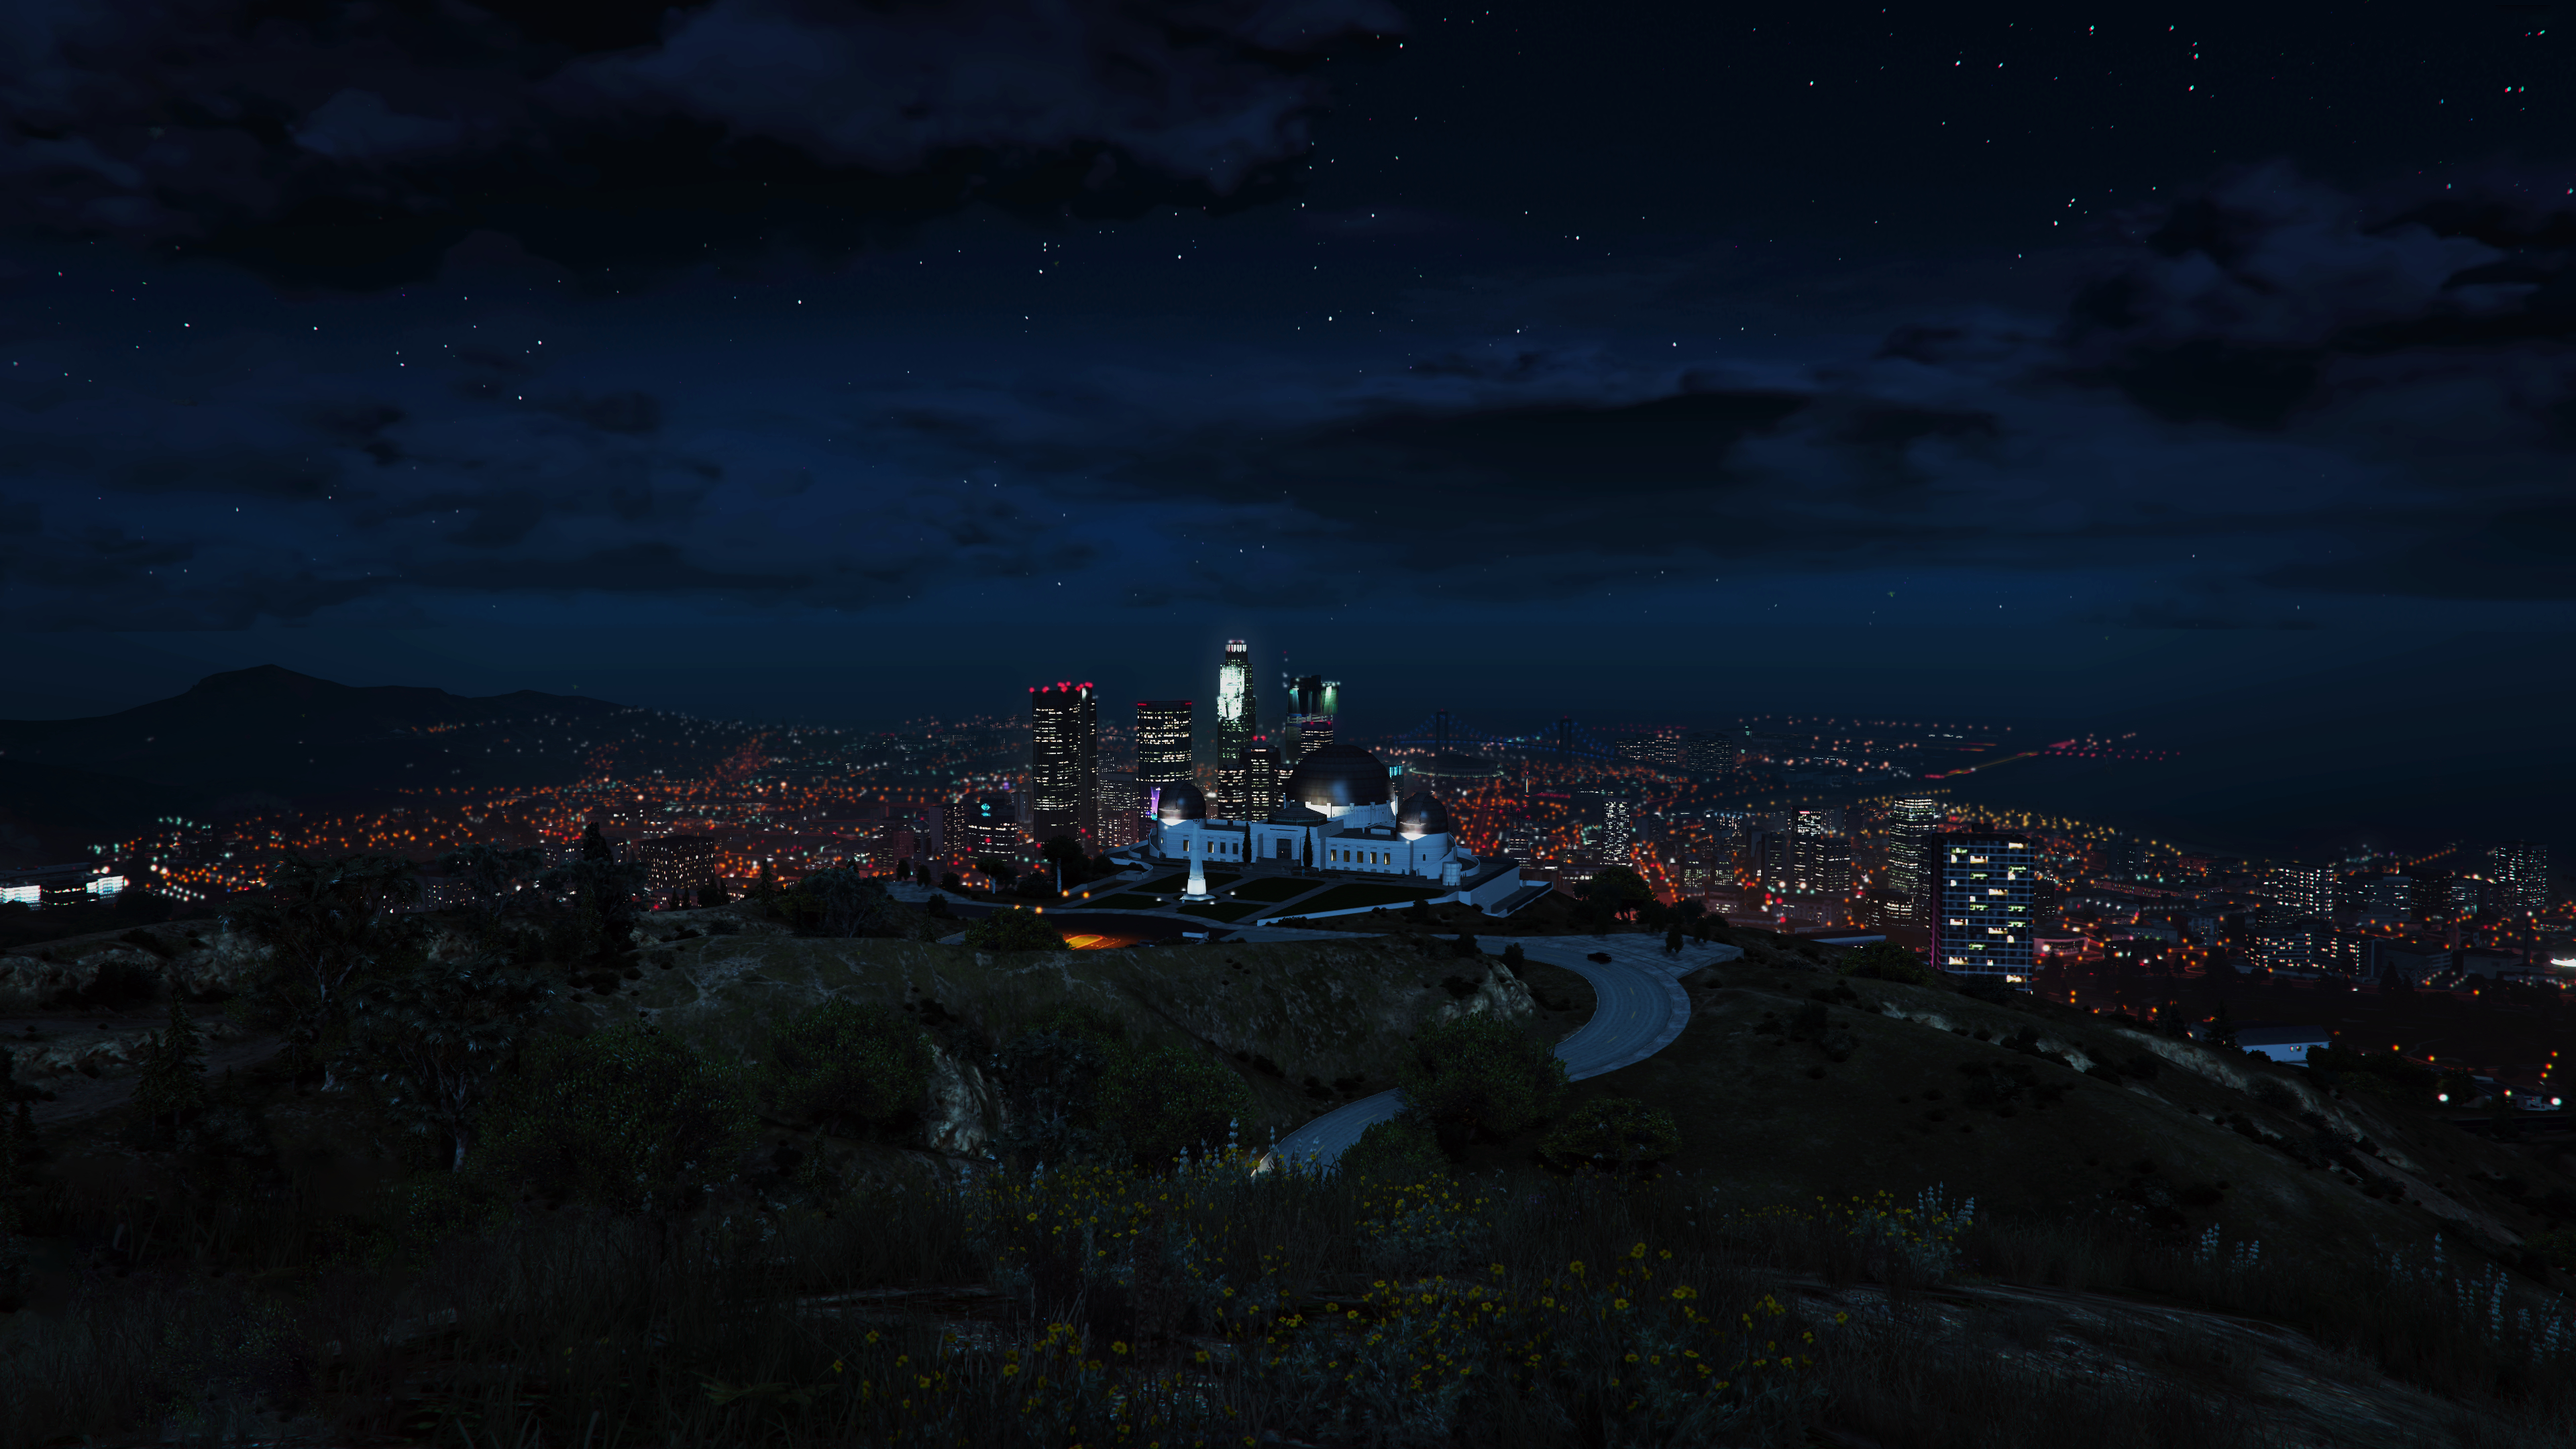 Grand Theft Auto 5 City View Wallpaper, HD Games 4K Wallpapers, Images,  Photos and Background - Wallpapers Den